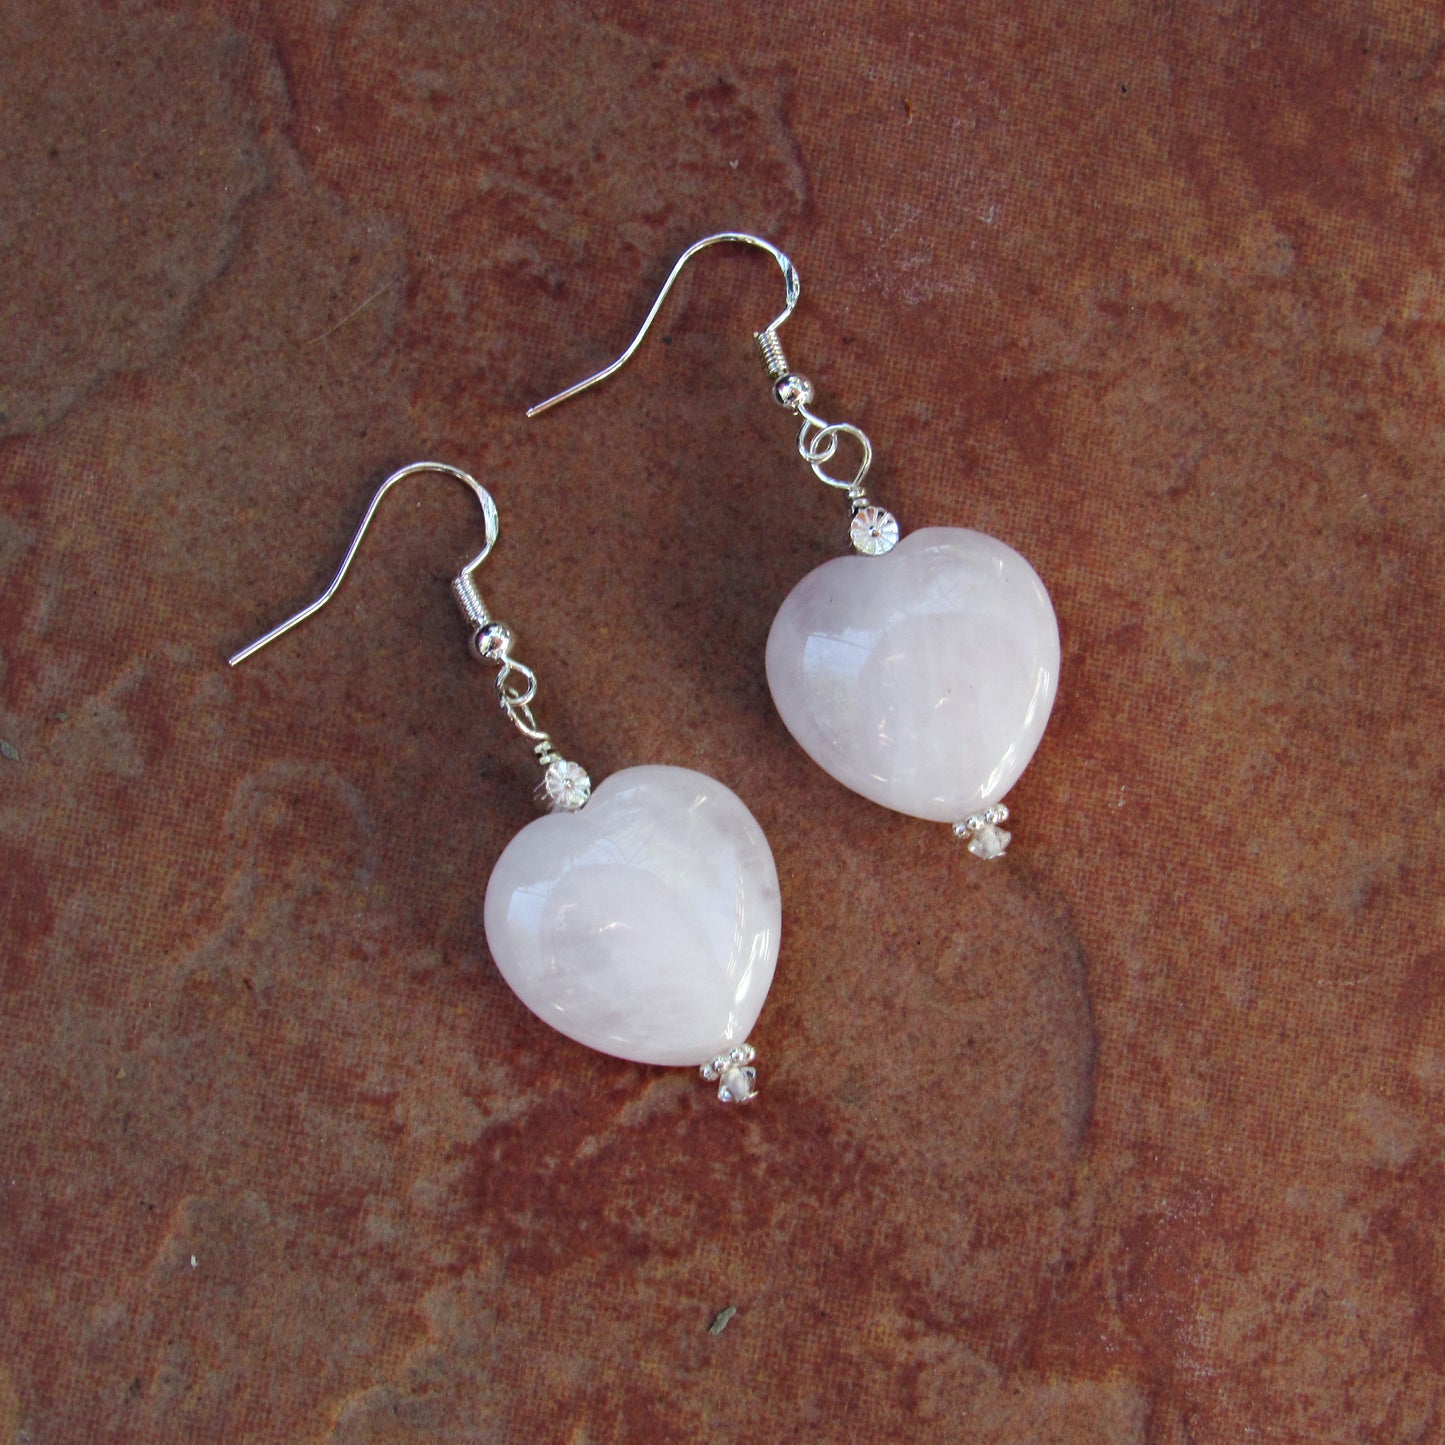 Rose Quartz Gemstone Hearts and Sterling Silver Drop Earrings